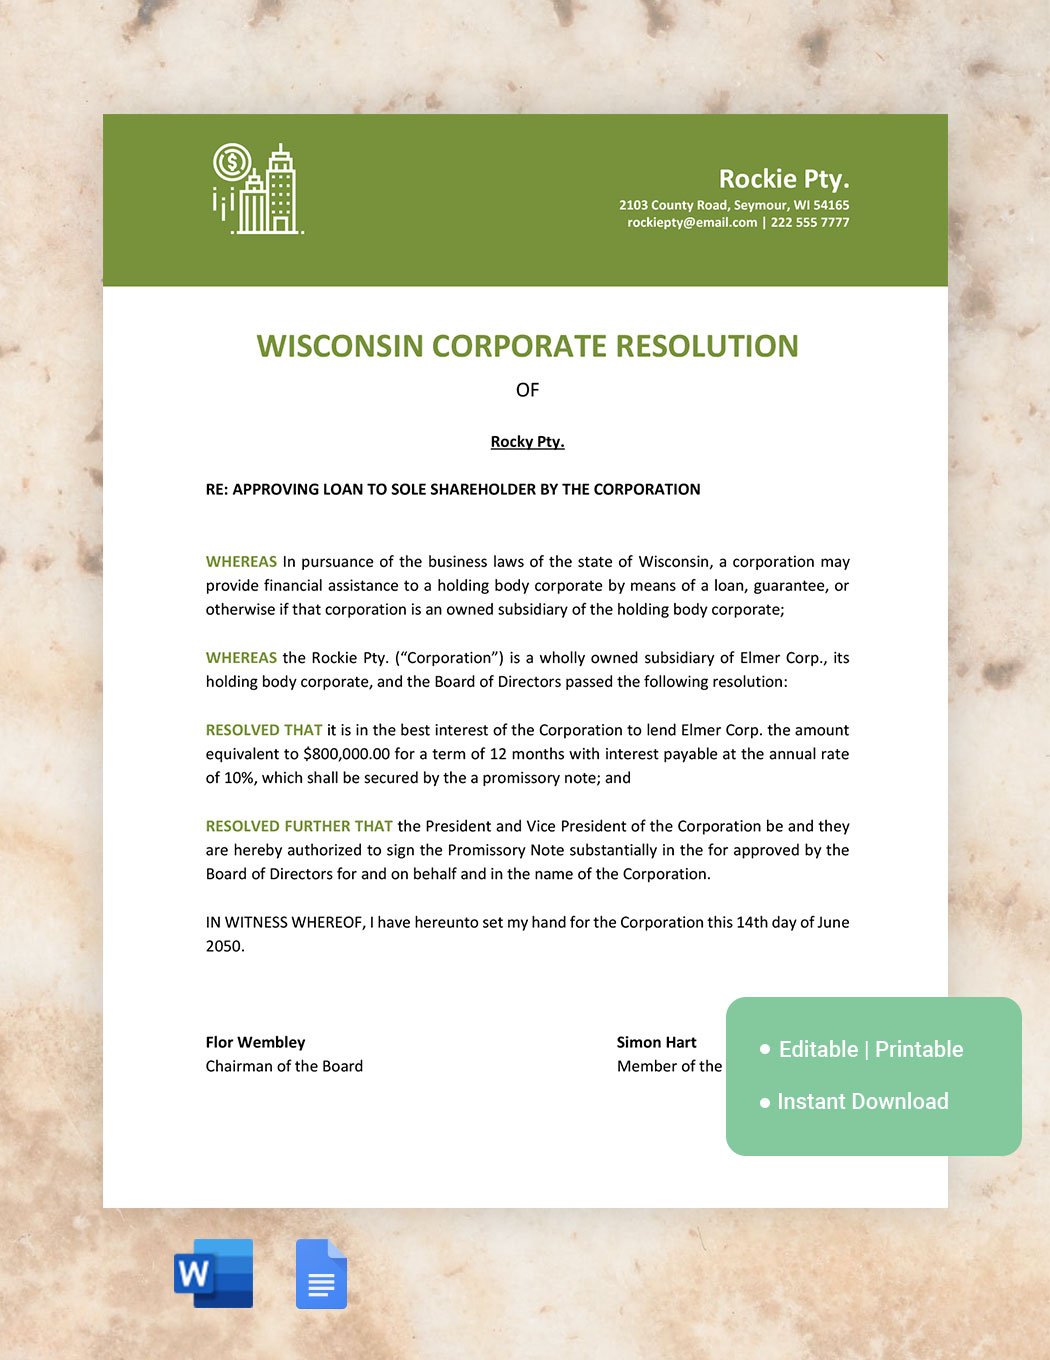 Wisconsin Corporate Resolution Template